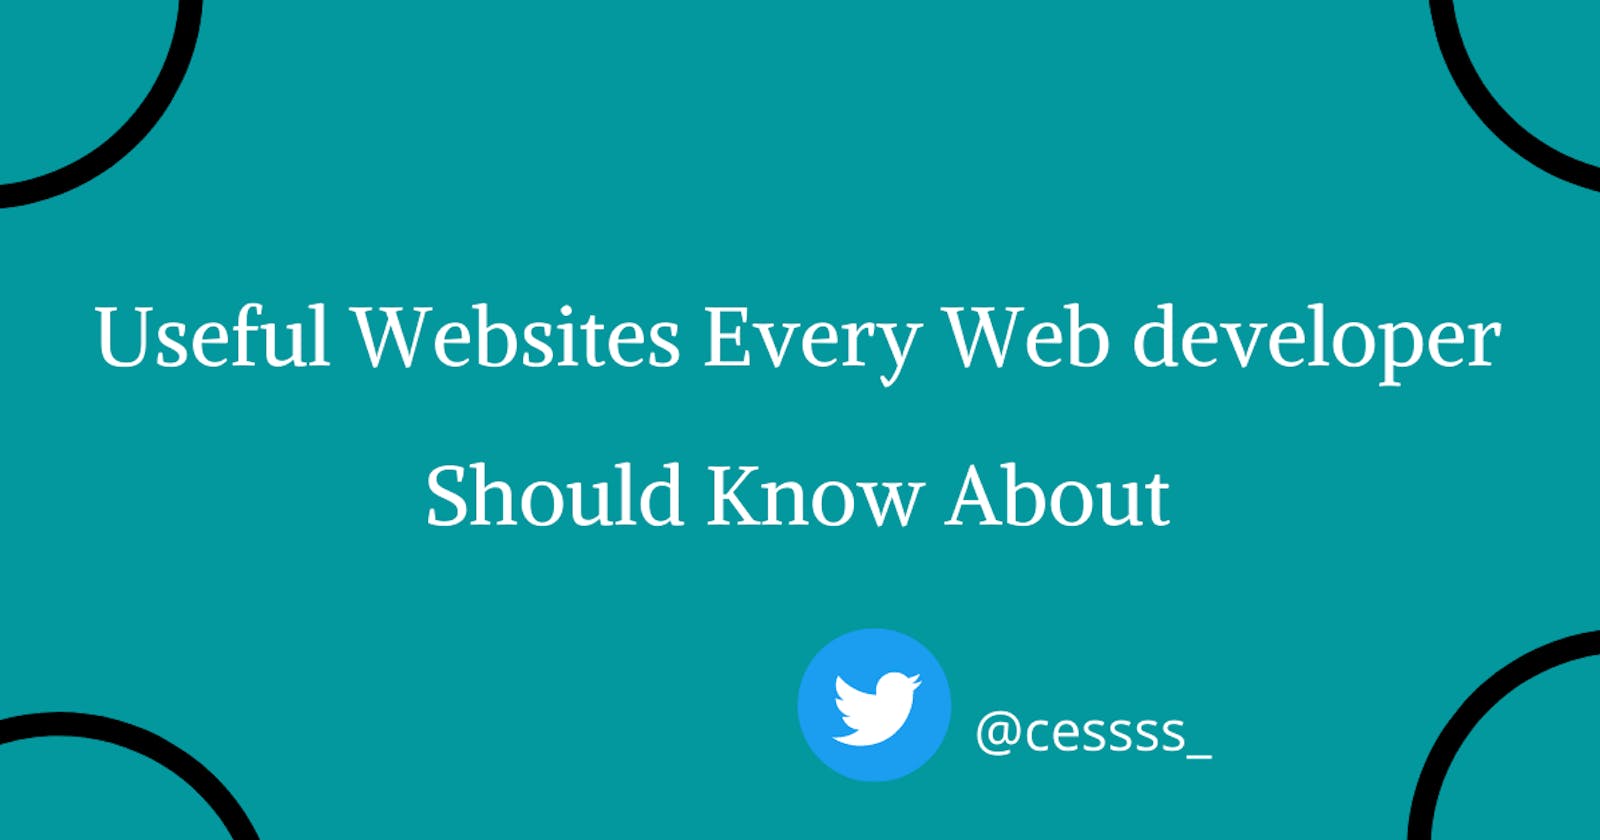 Useful Websites Every Web developer Should Know About.